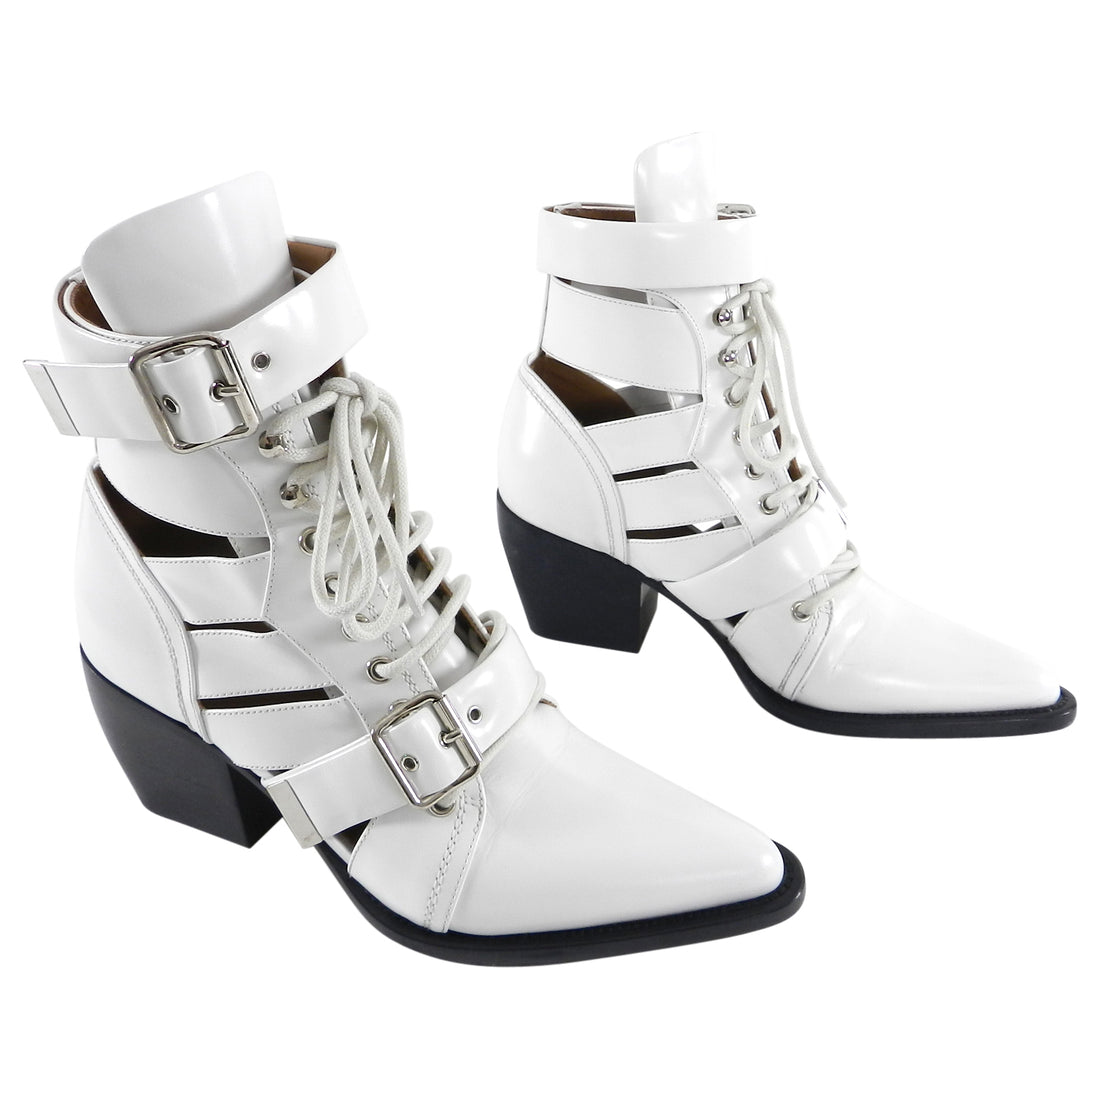 Chloe White Rylee Medium Lace Up Cut Out Ankle boots - 39.5